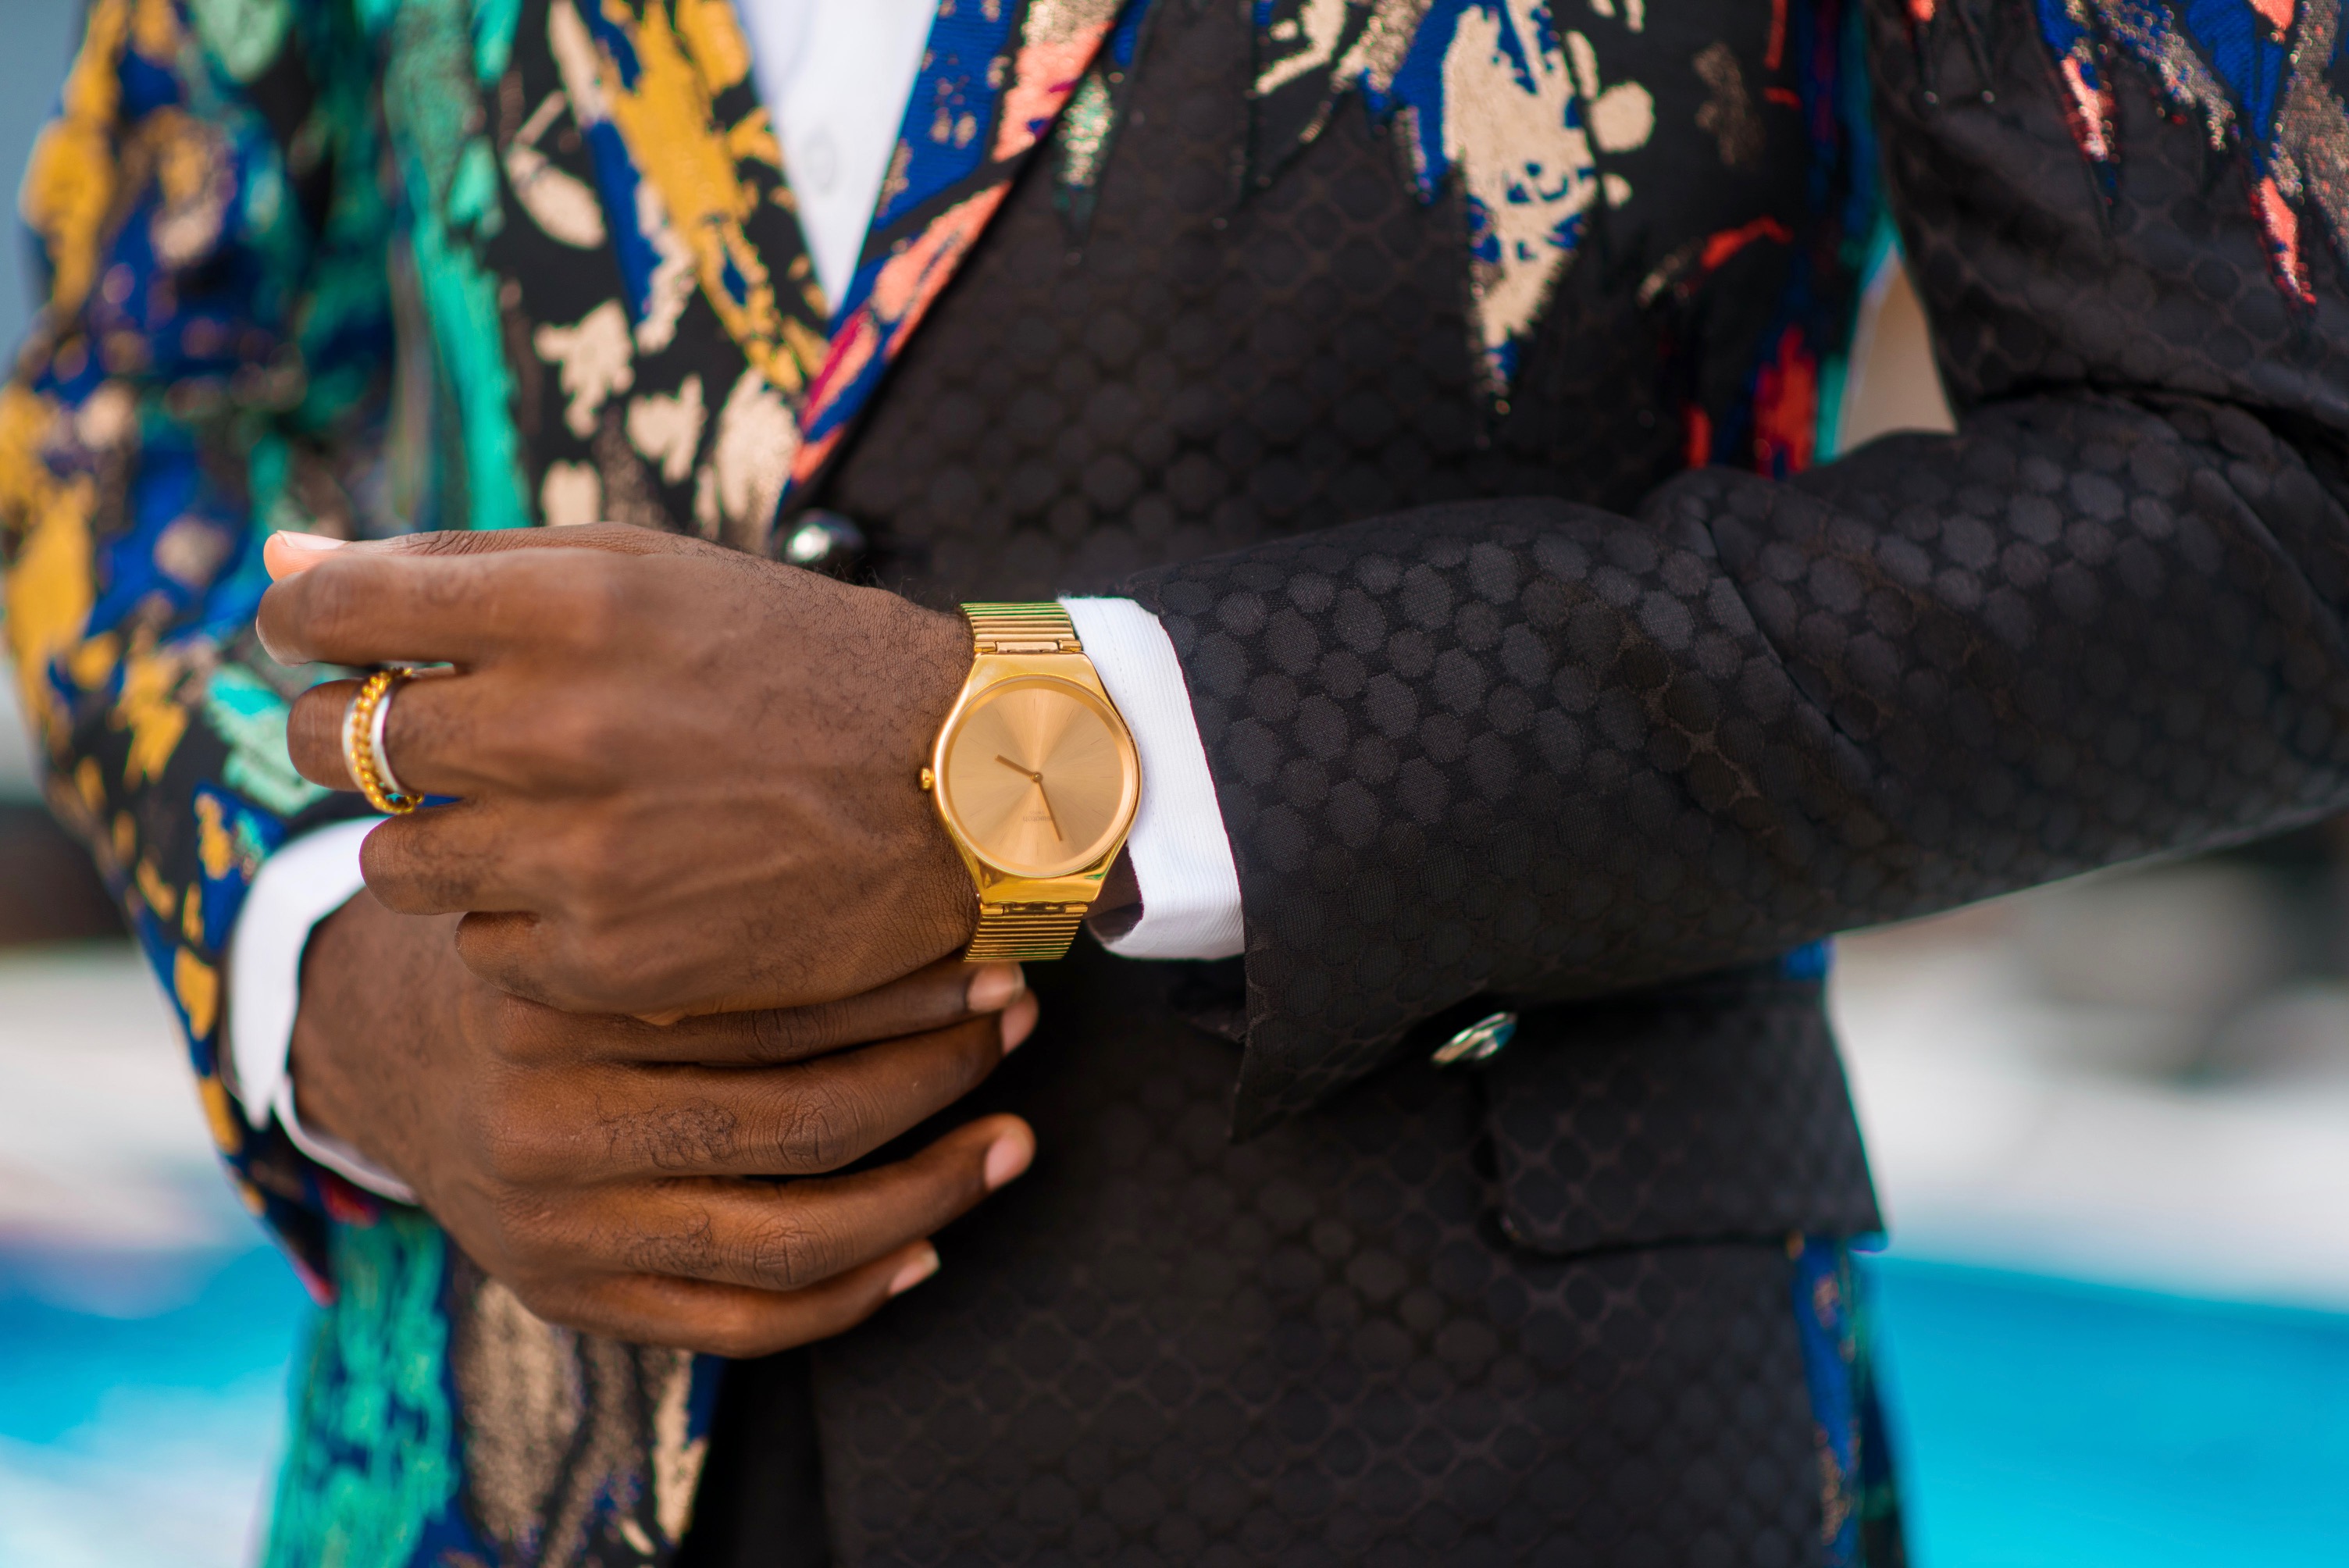 3 Wedding Guest Looks you can Copy from Men's Style Blogger Akin Faminu ...